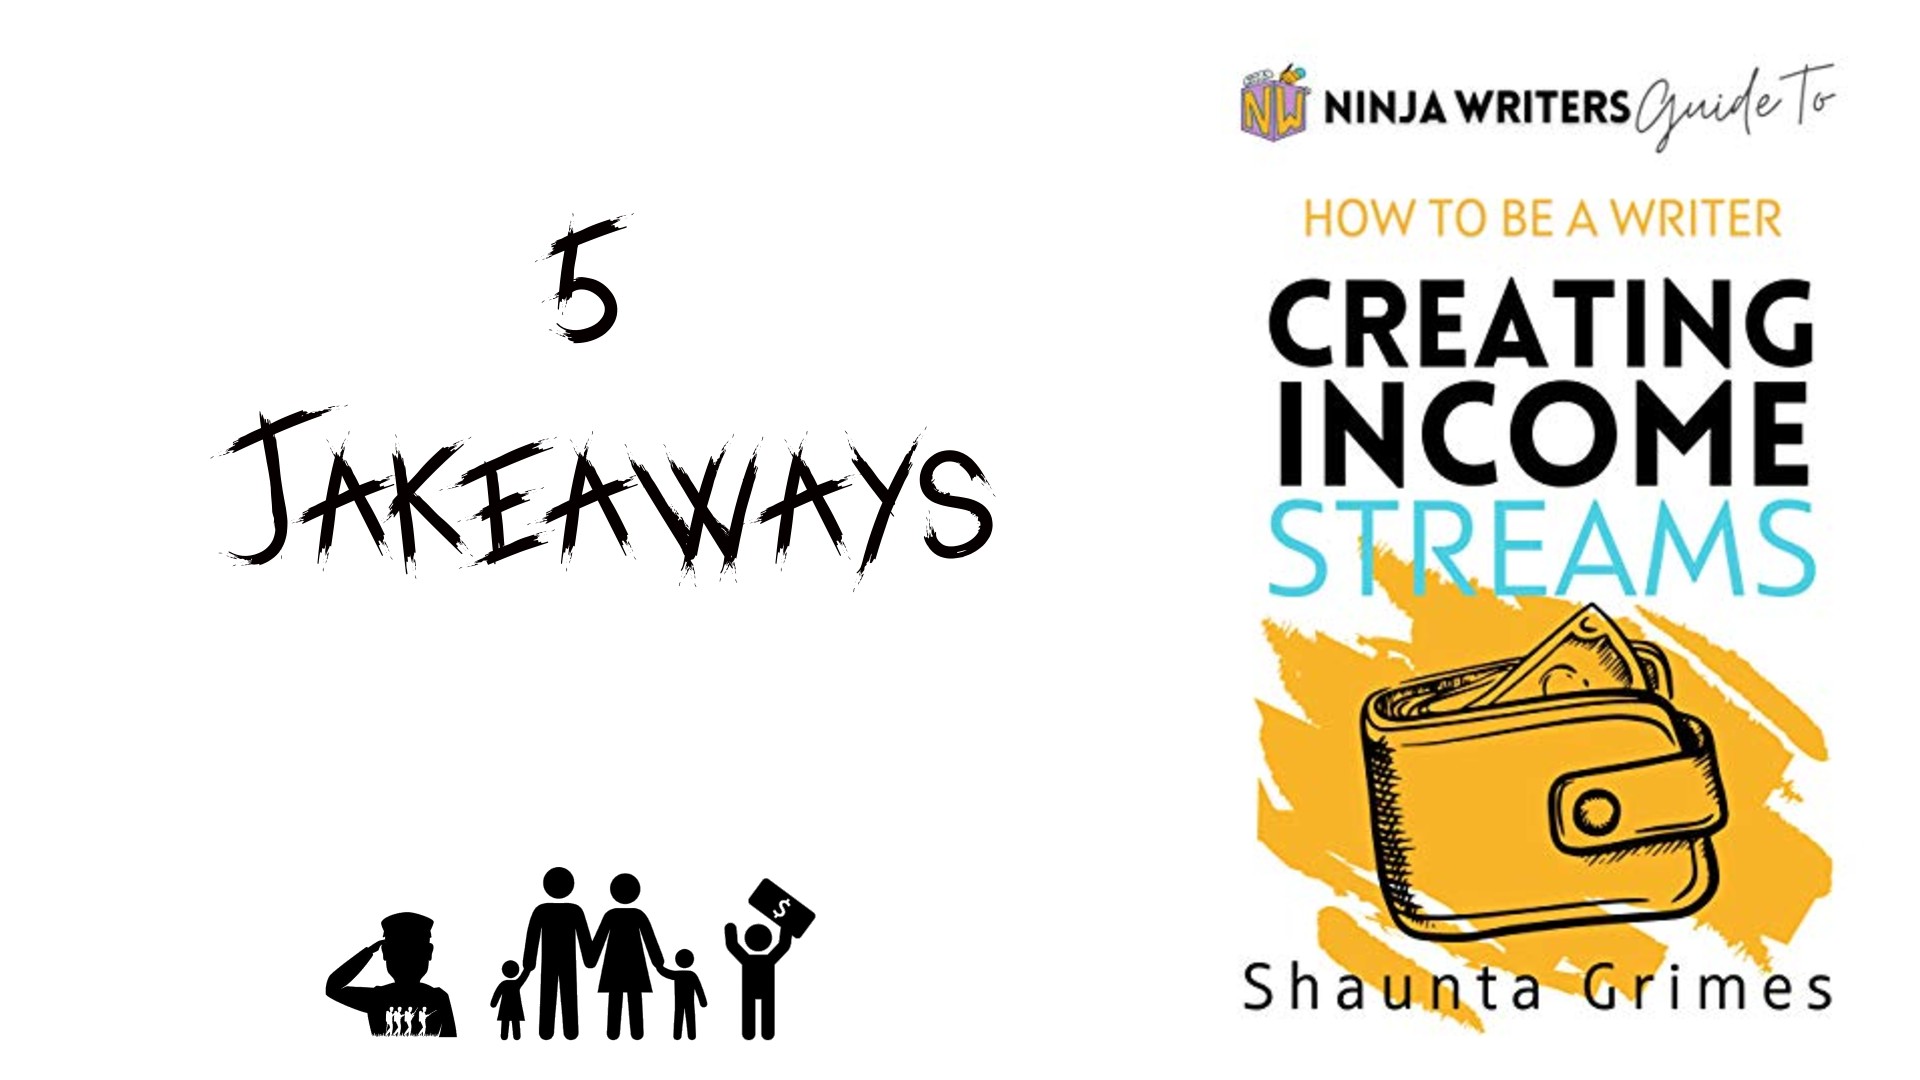 5 Takeaways from “Creating Income Streams”